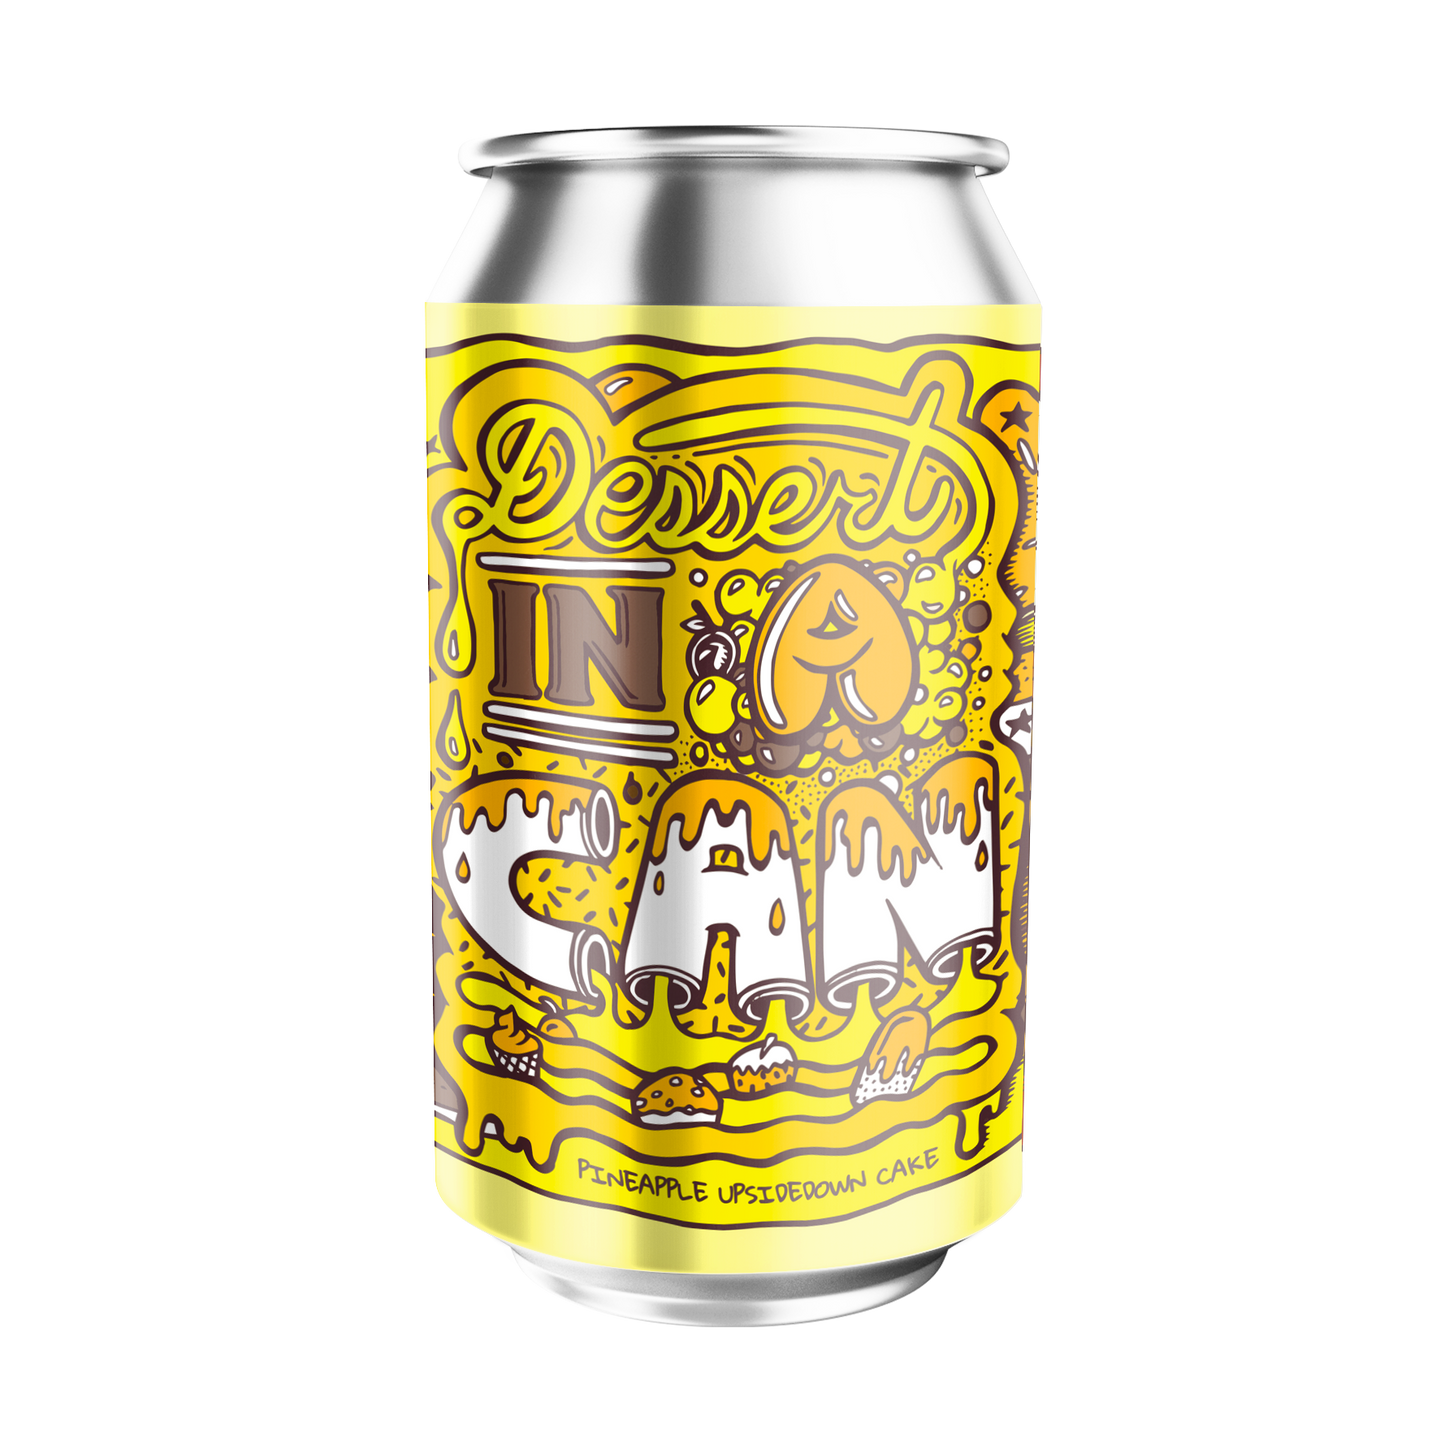 Pineapple Upside Down Cake - 10.5% Dessert in a Can